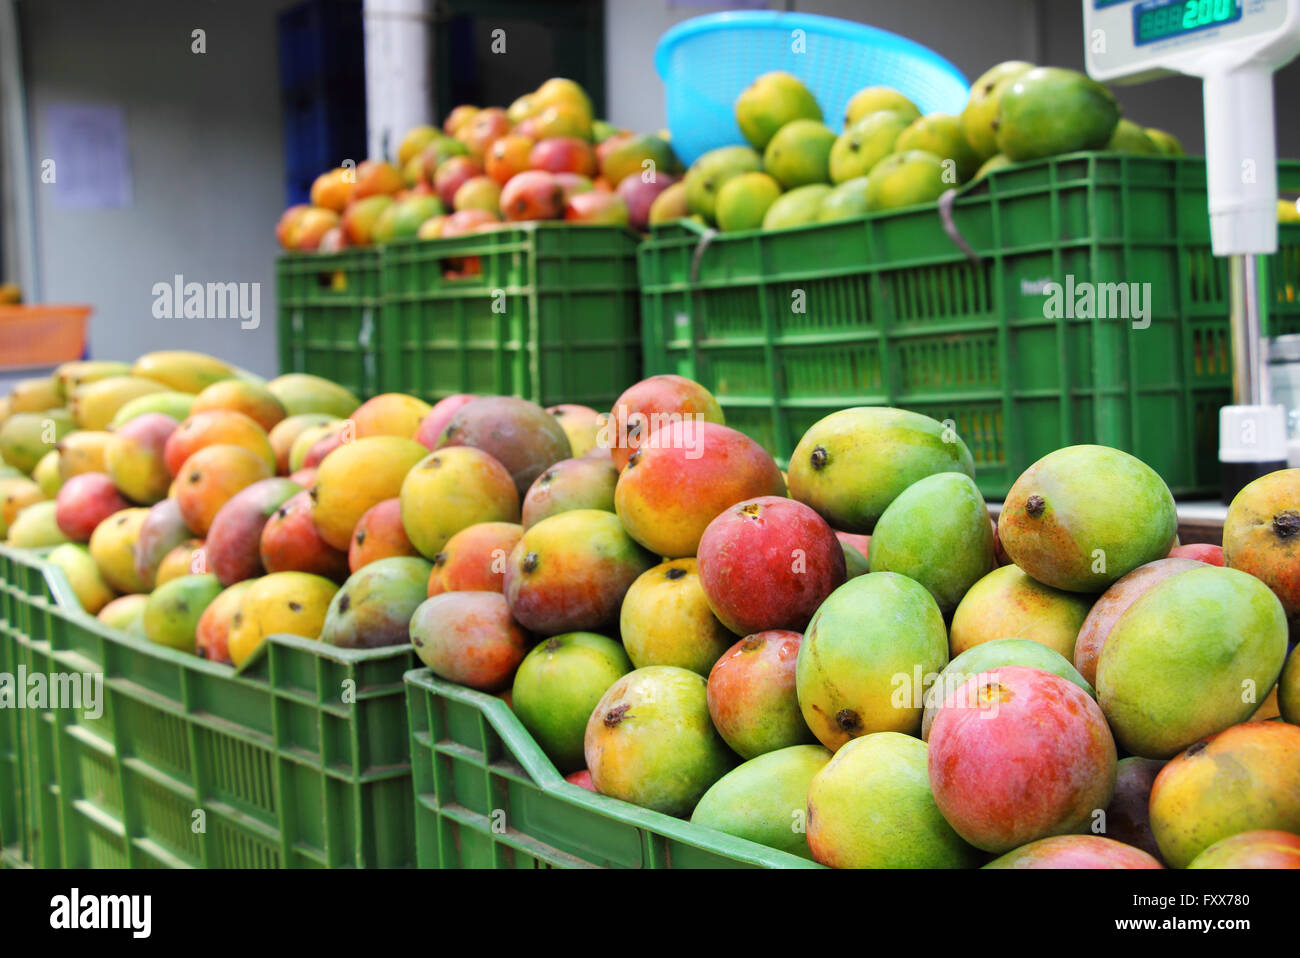 Sale of Different Varieties of Indian Mangoes. India produces mangoes